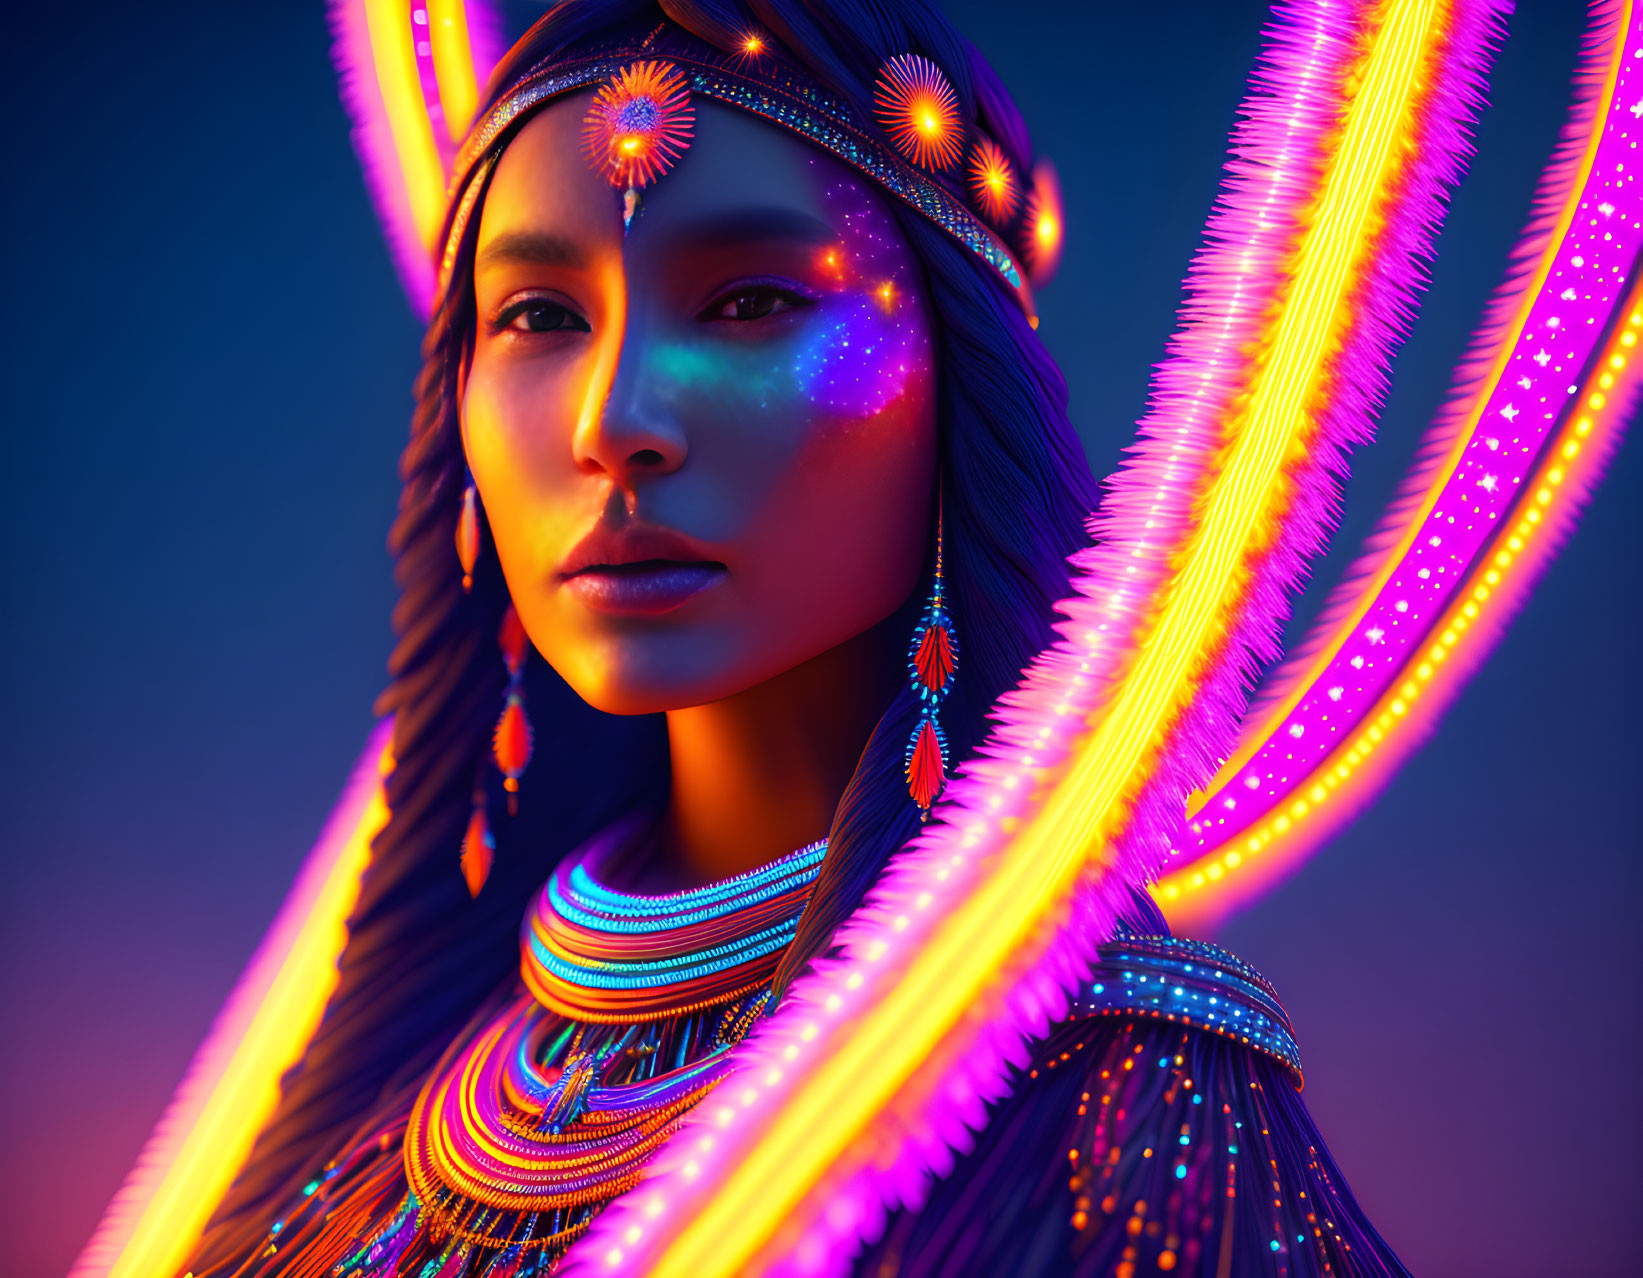 Colorful Tribal Makeup and Headdress Under Neon Lights